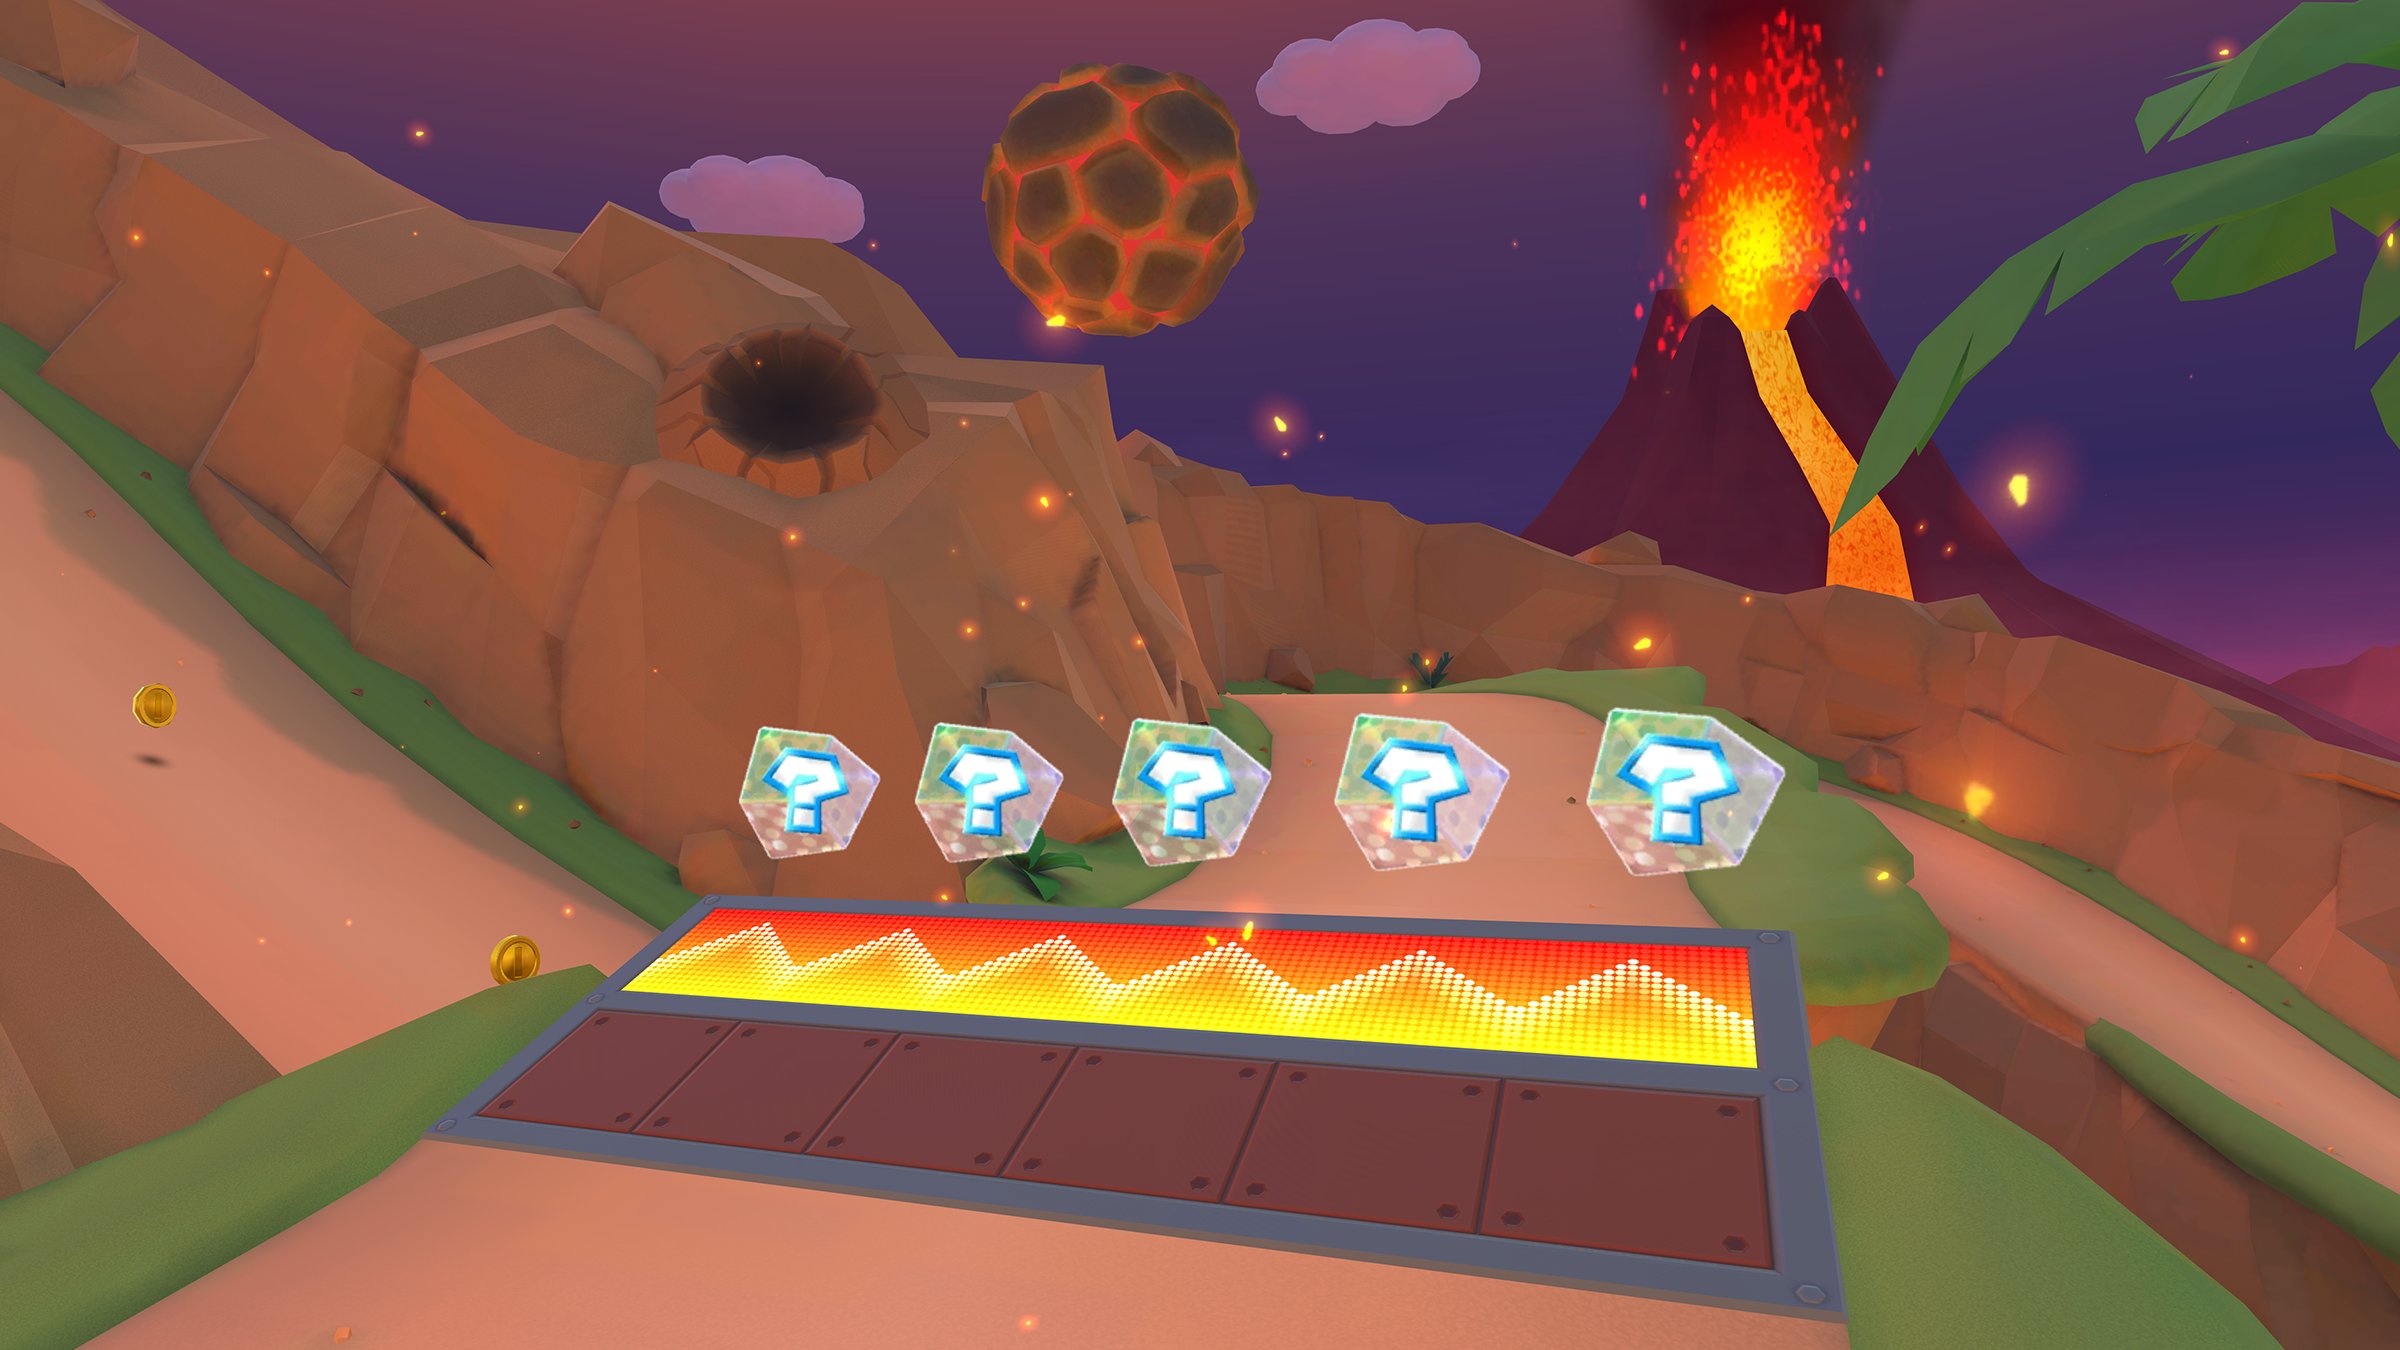 Mario Kart Tour on X: It's a bit early, but here's a sneak peek at the  next tour in #MarioKartTour! It looks like the stage will be set on a  volcano with